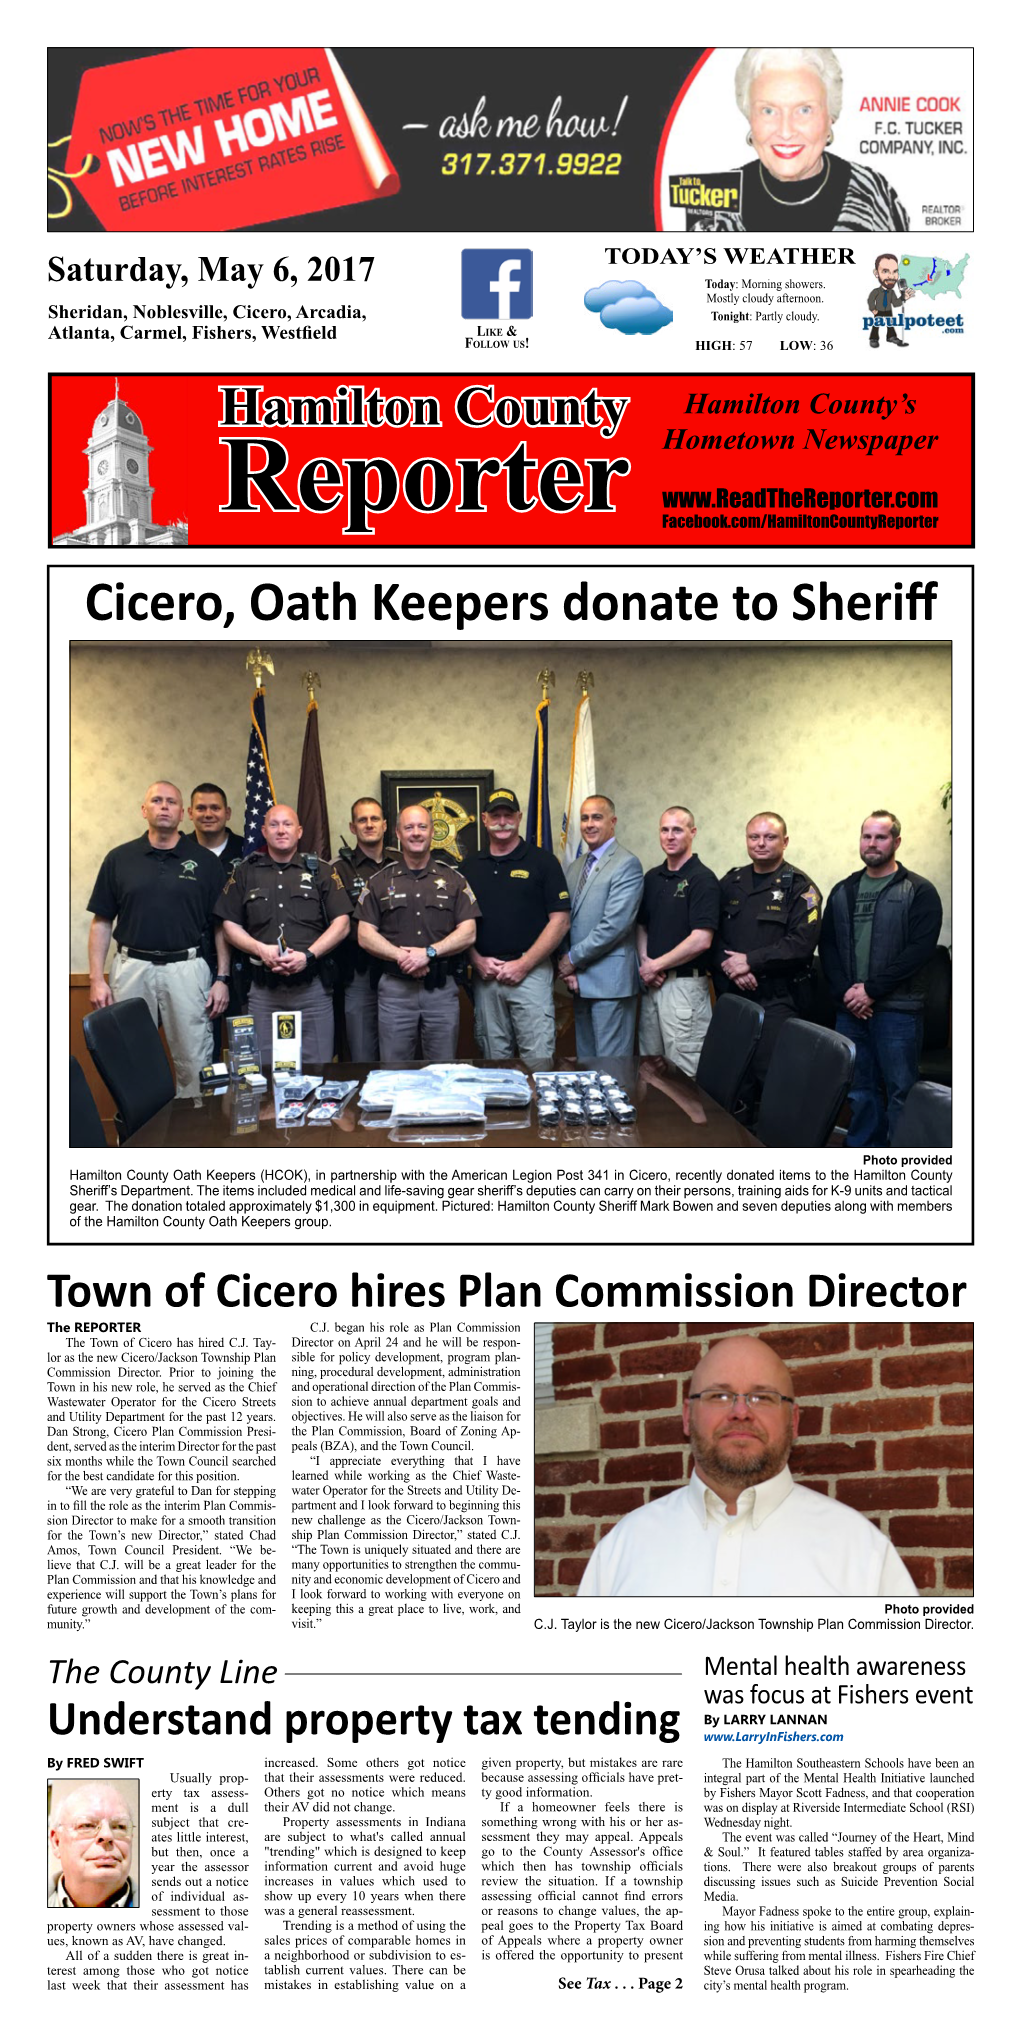 Cicero, Oath Keepers Donate to Sheriff